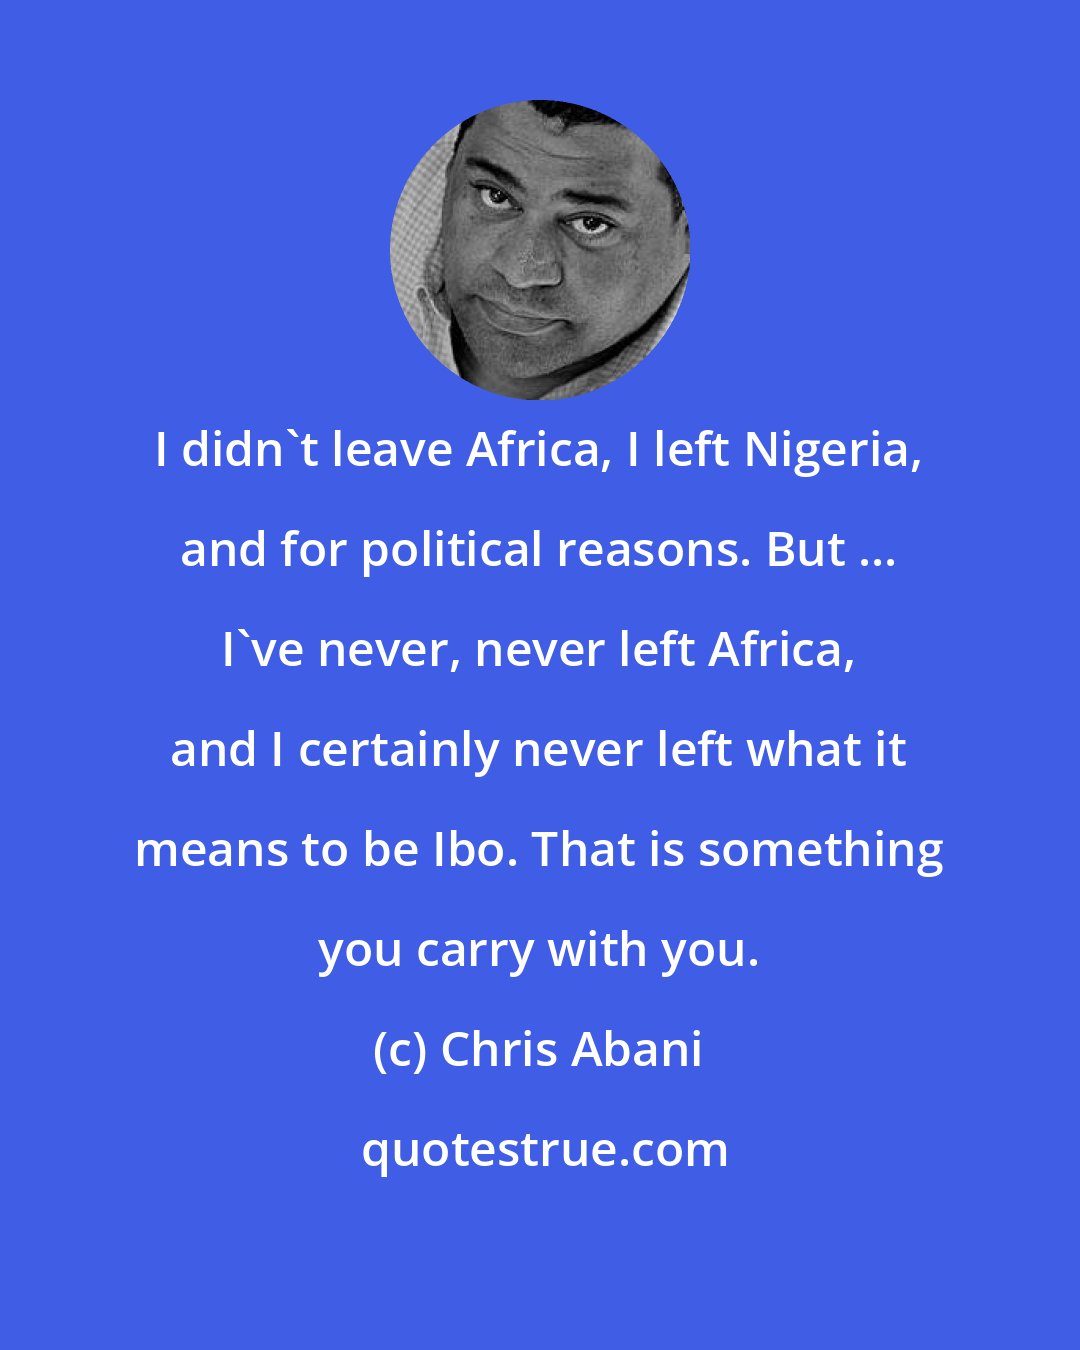 Chris Abani: I didn't leave Africa, I left Nigeria, and for political reasons. But ... I've never, never left Africa, and I certainly never left what it means to be Ibo. That is something you carry with you.